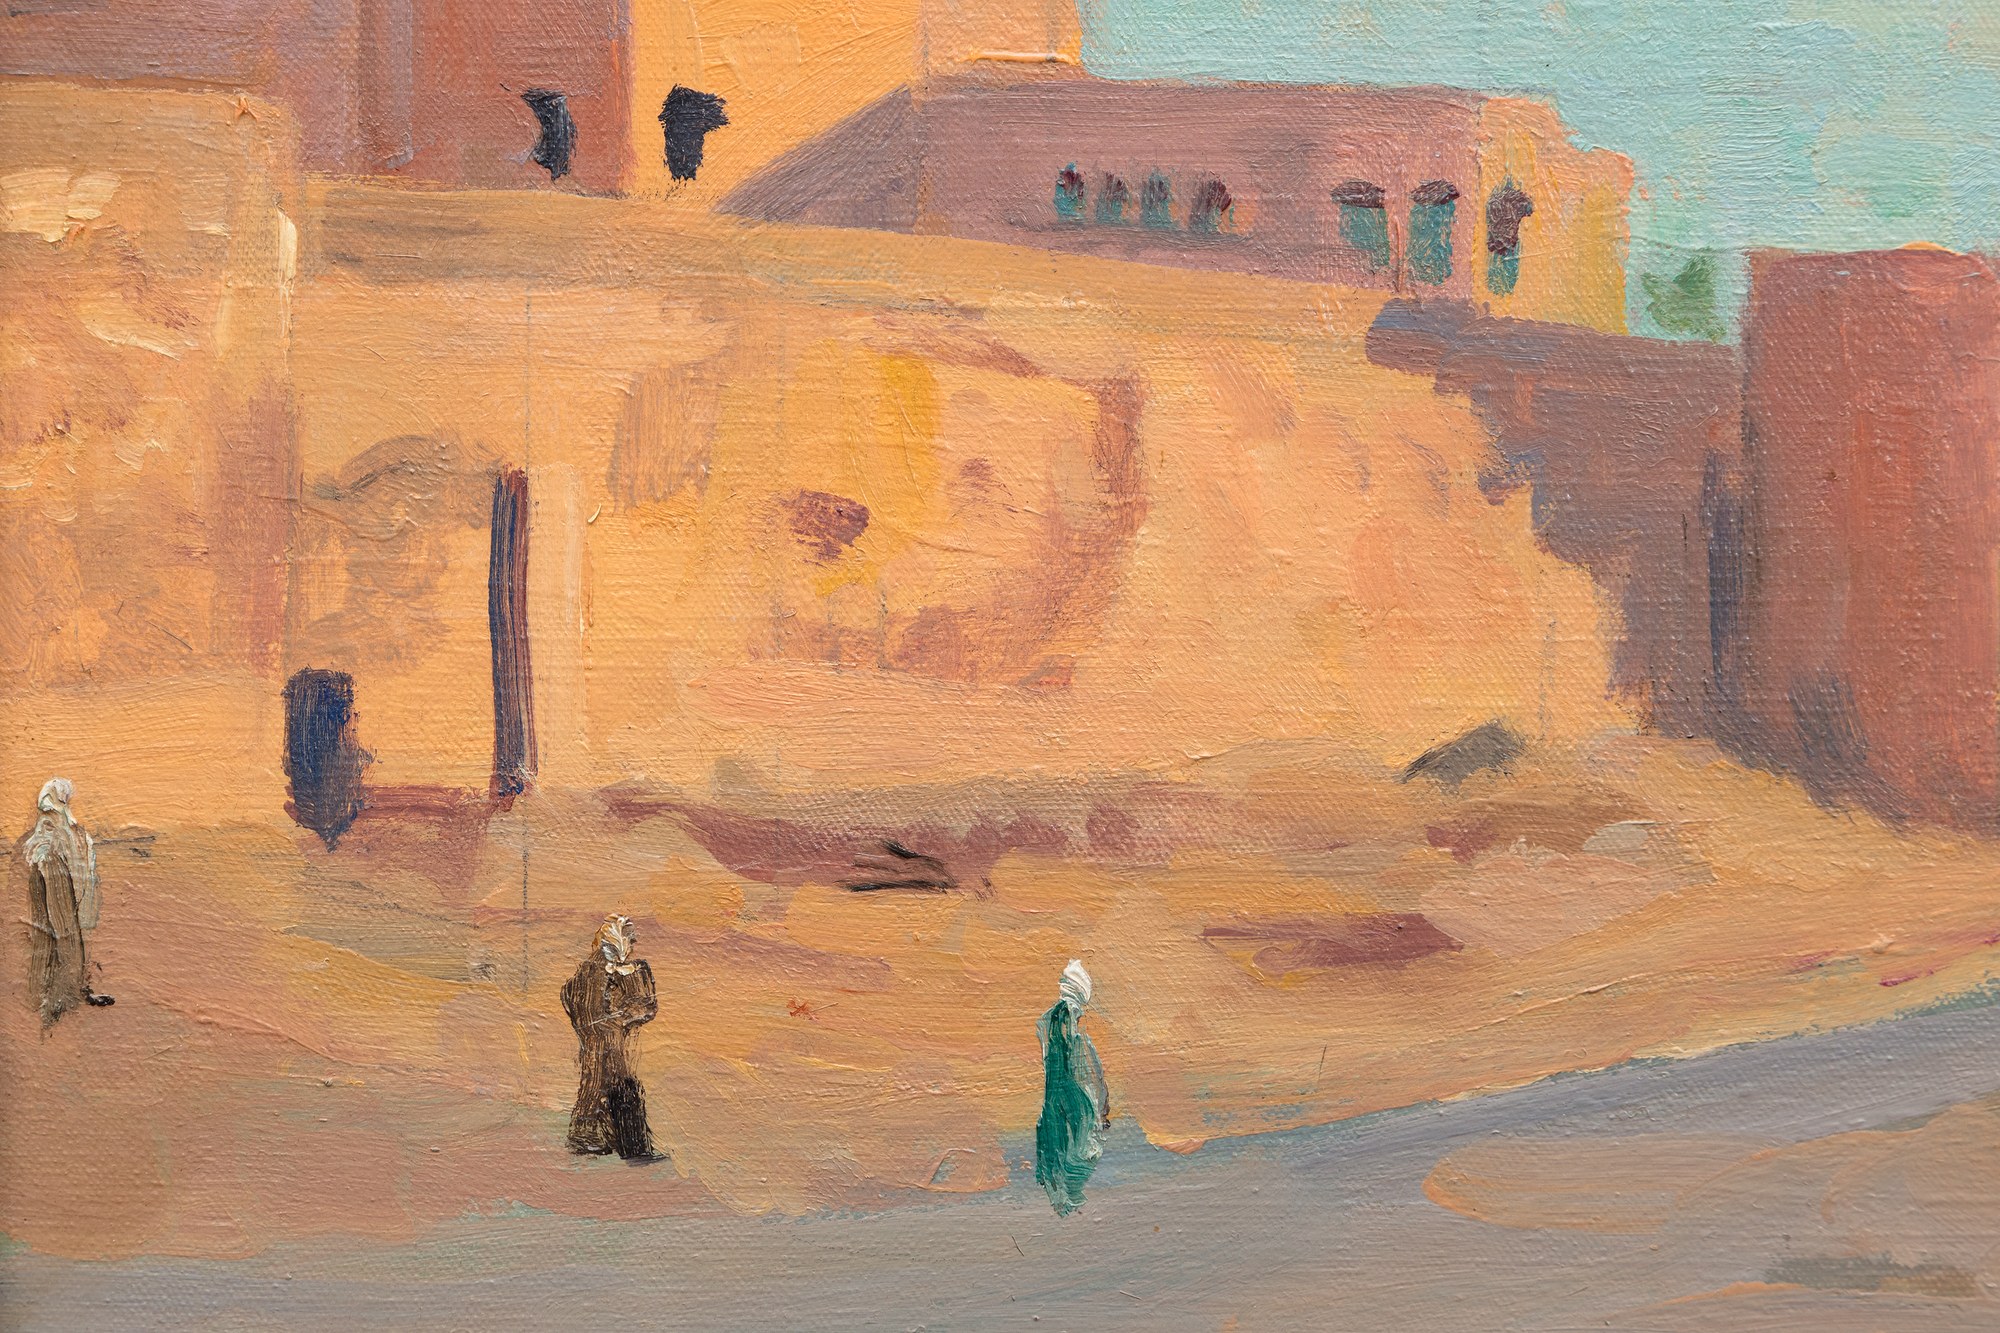 An outstanding example of Churchill’s North African scenes, one in which he deftly captures the scenery and light that his artistic mentor, John Lavery, had told him about in the mid 1930s.  Another artist mentor, Walter Sickert, taught Churchill how to project photo images directly on to a canvas as an aid in painting, a technique used to advantage in this instance.  The Studio Archives at Chartwell include 5 photographs, one of the camel and four others, that Churchill used as aids.&lt;br&gt;&lt;br&gt;With the visual aids, Churchill could focus on the vibrant colors, the tan of the sand and buildings contrasting with the brilliant blue skies, splashes of green adding energy to the painting. A different Marrakech scene, “Tower of the Koutoubia Mosque”, set an auction record for Churchill when it sold in 2021 for $11 million USD.